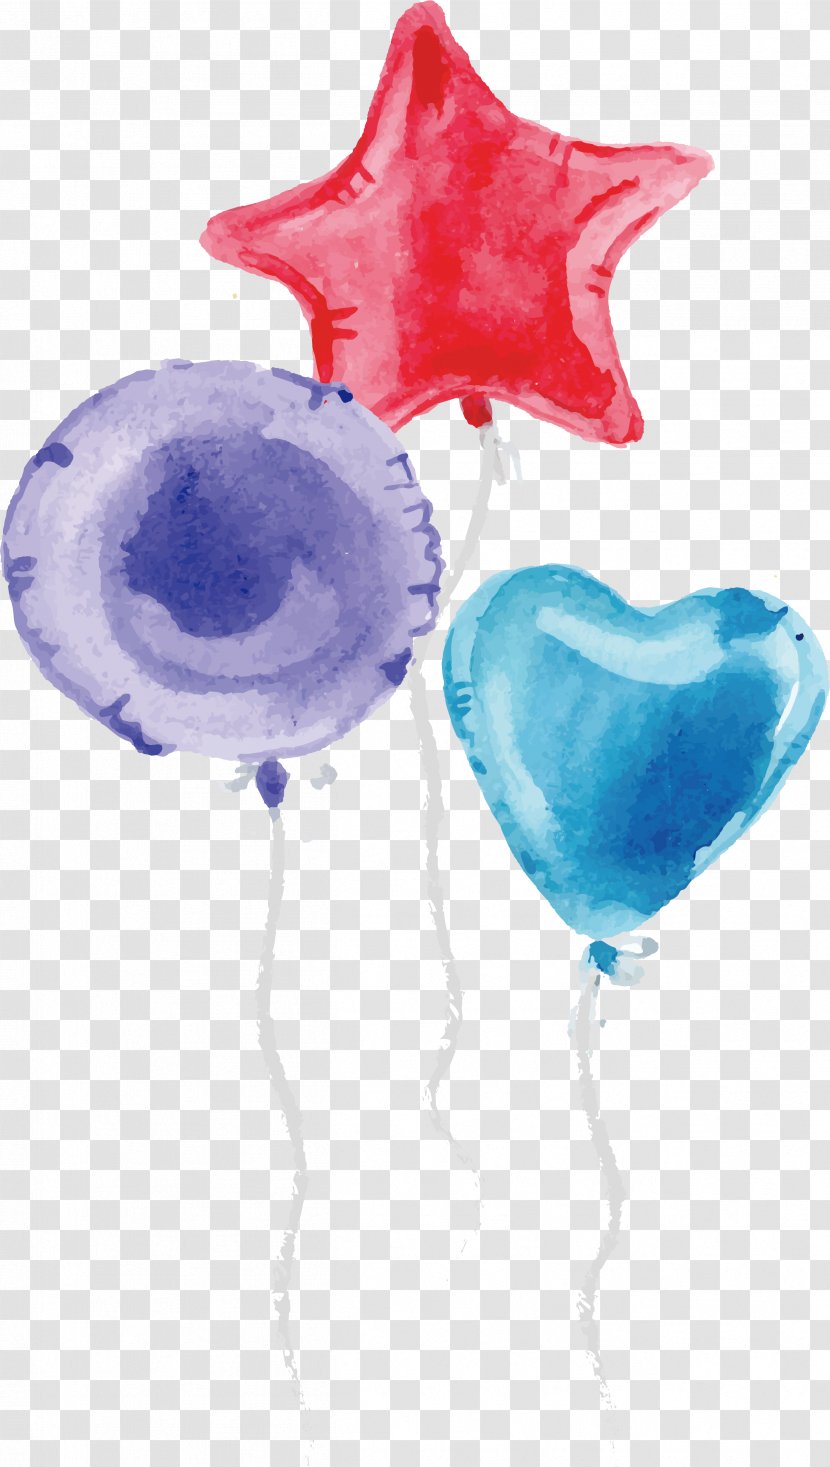 Birthday Watercolor Painting Party - Balloon Design Transparent PNG